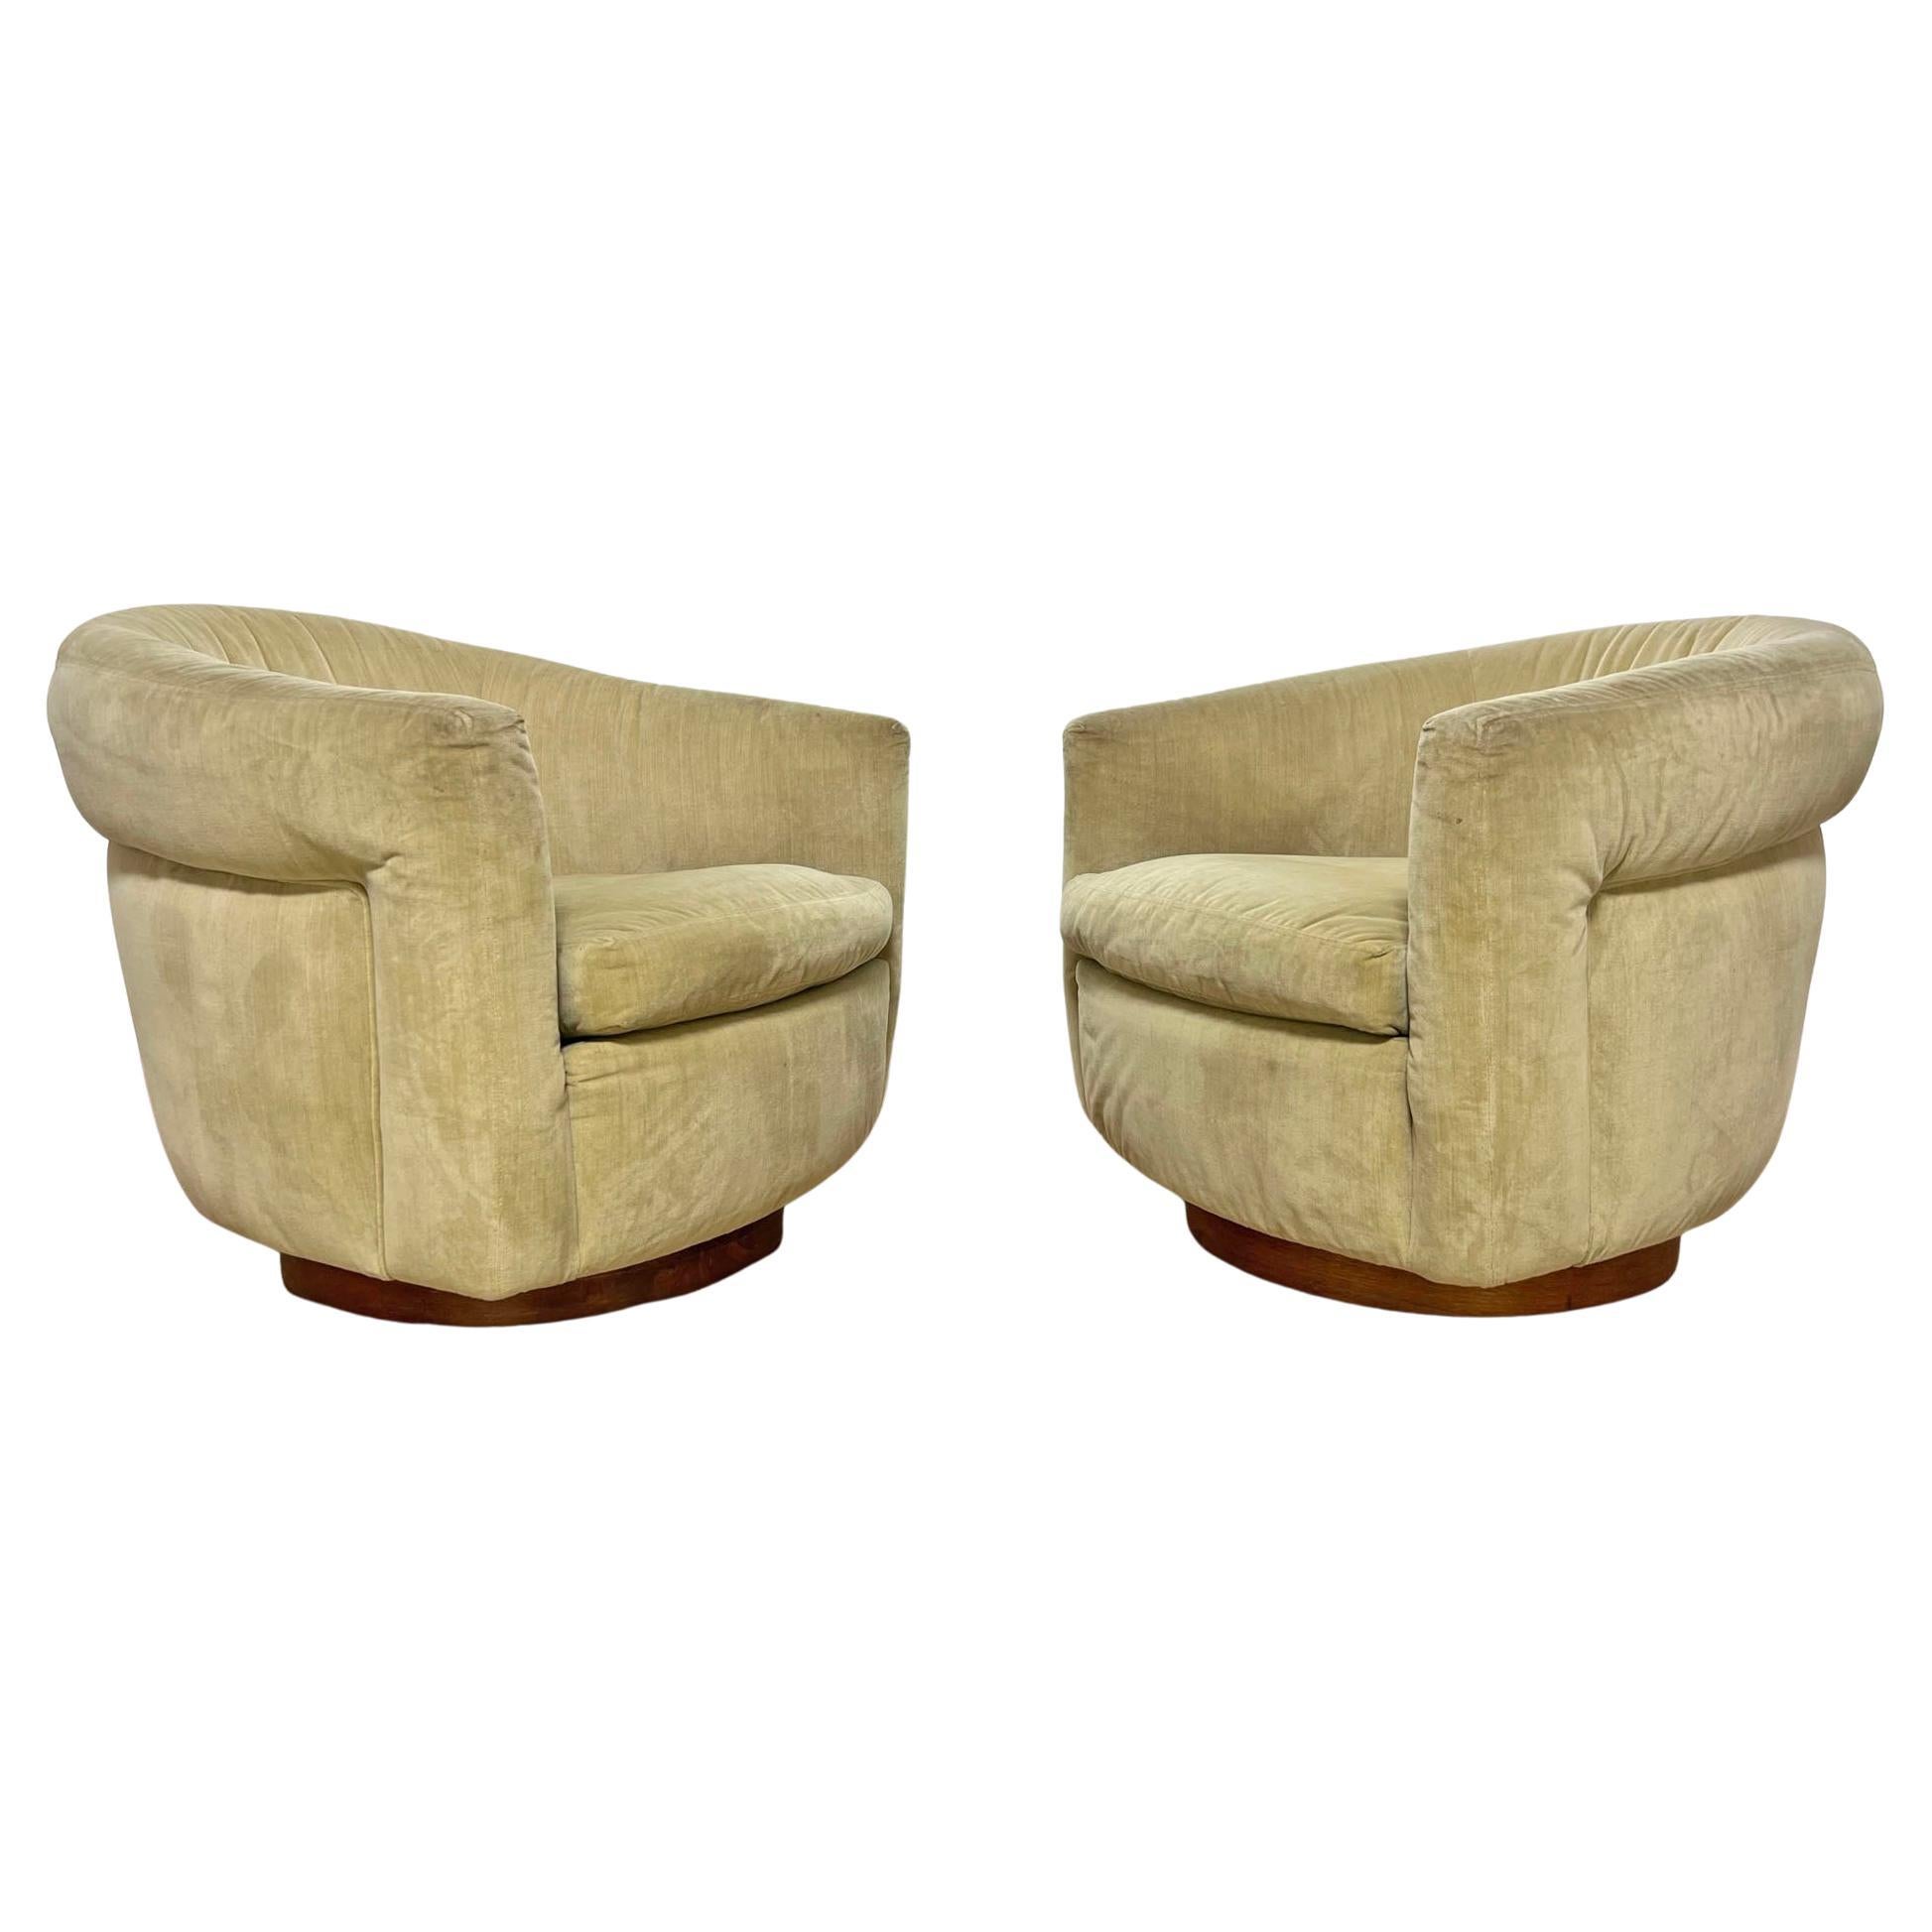 Pair of Signed Milo Baughman for Thayer Coggin Swivel Tub Chairs Ca. 1970s